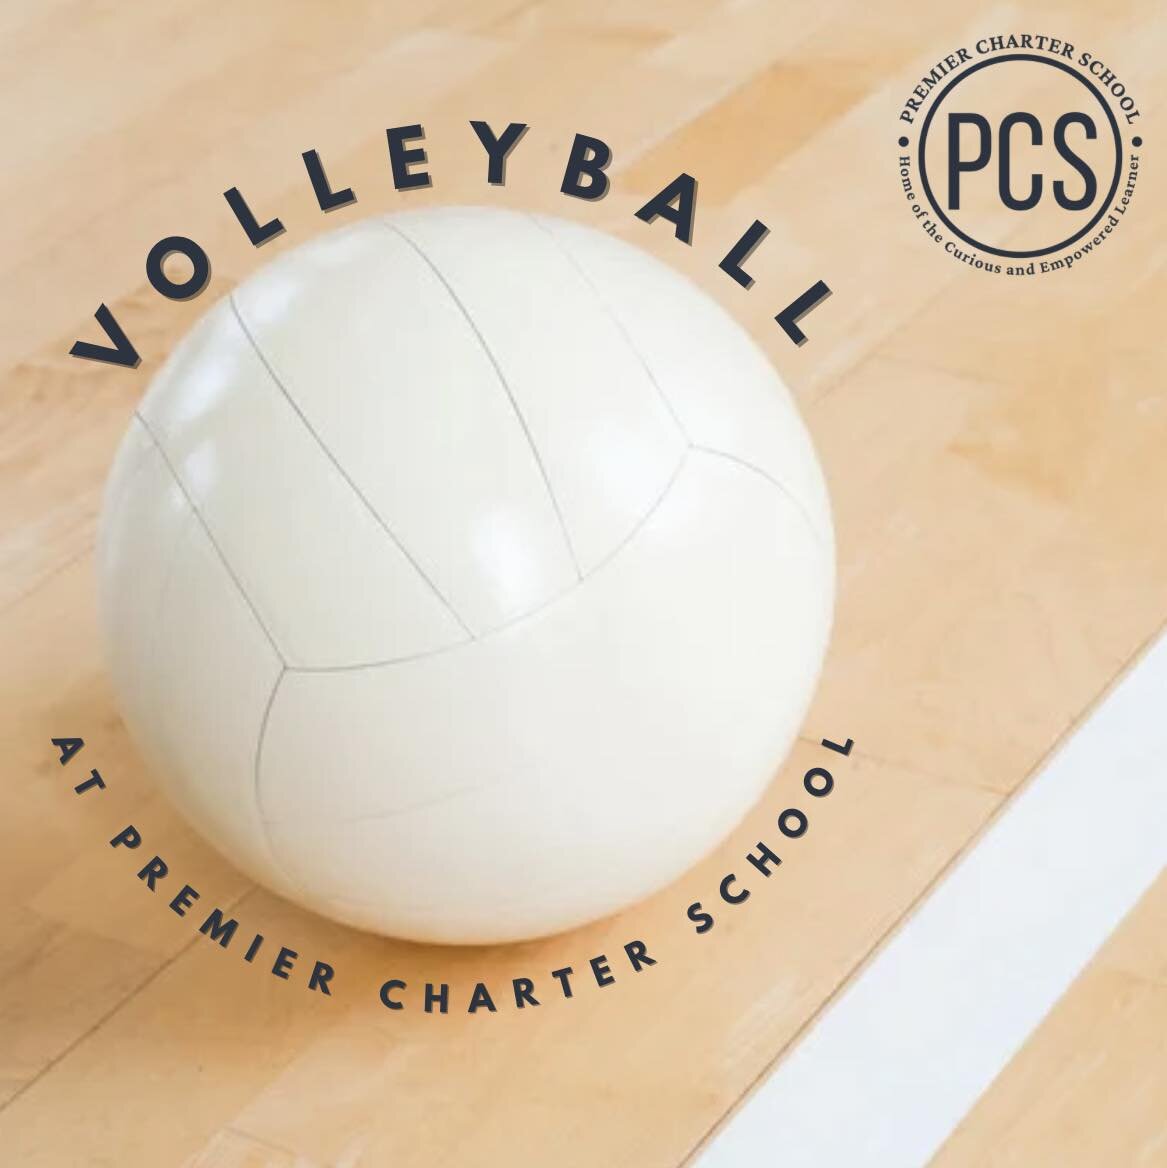 This Spring season our Boys Middle School volleyball team will be hosting games at Premier Charter School for the 1st time ever 🏐

Please come out to show your support! Click the link below to view the schedule of home games:

www.premiercharterscho